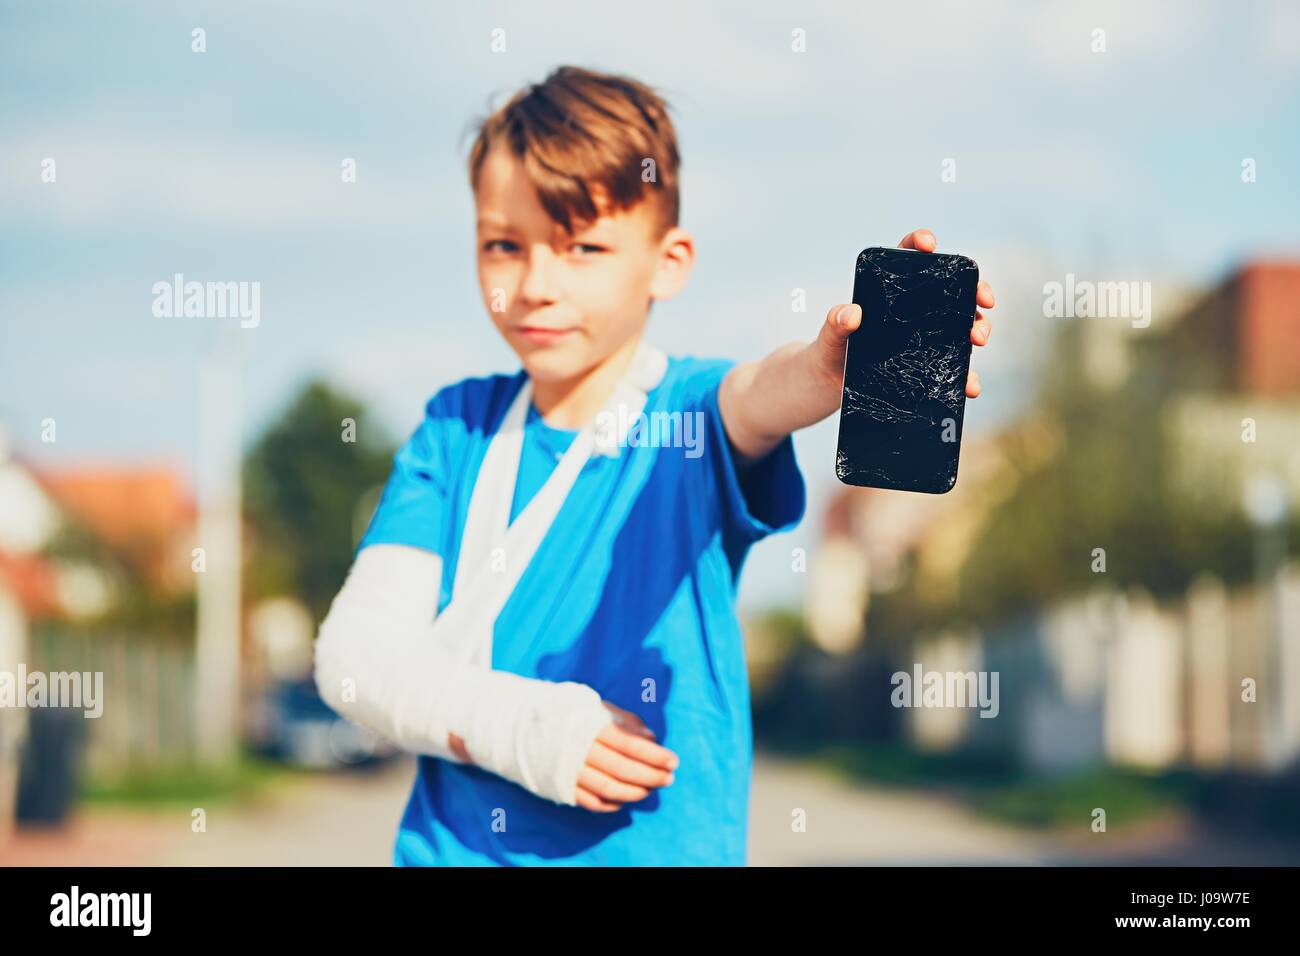 Little boy with broken hand injured after accident showing damaged mobile phone Stock Photo